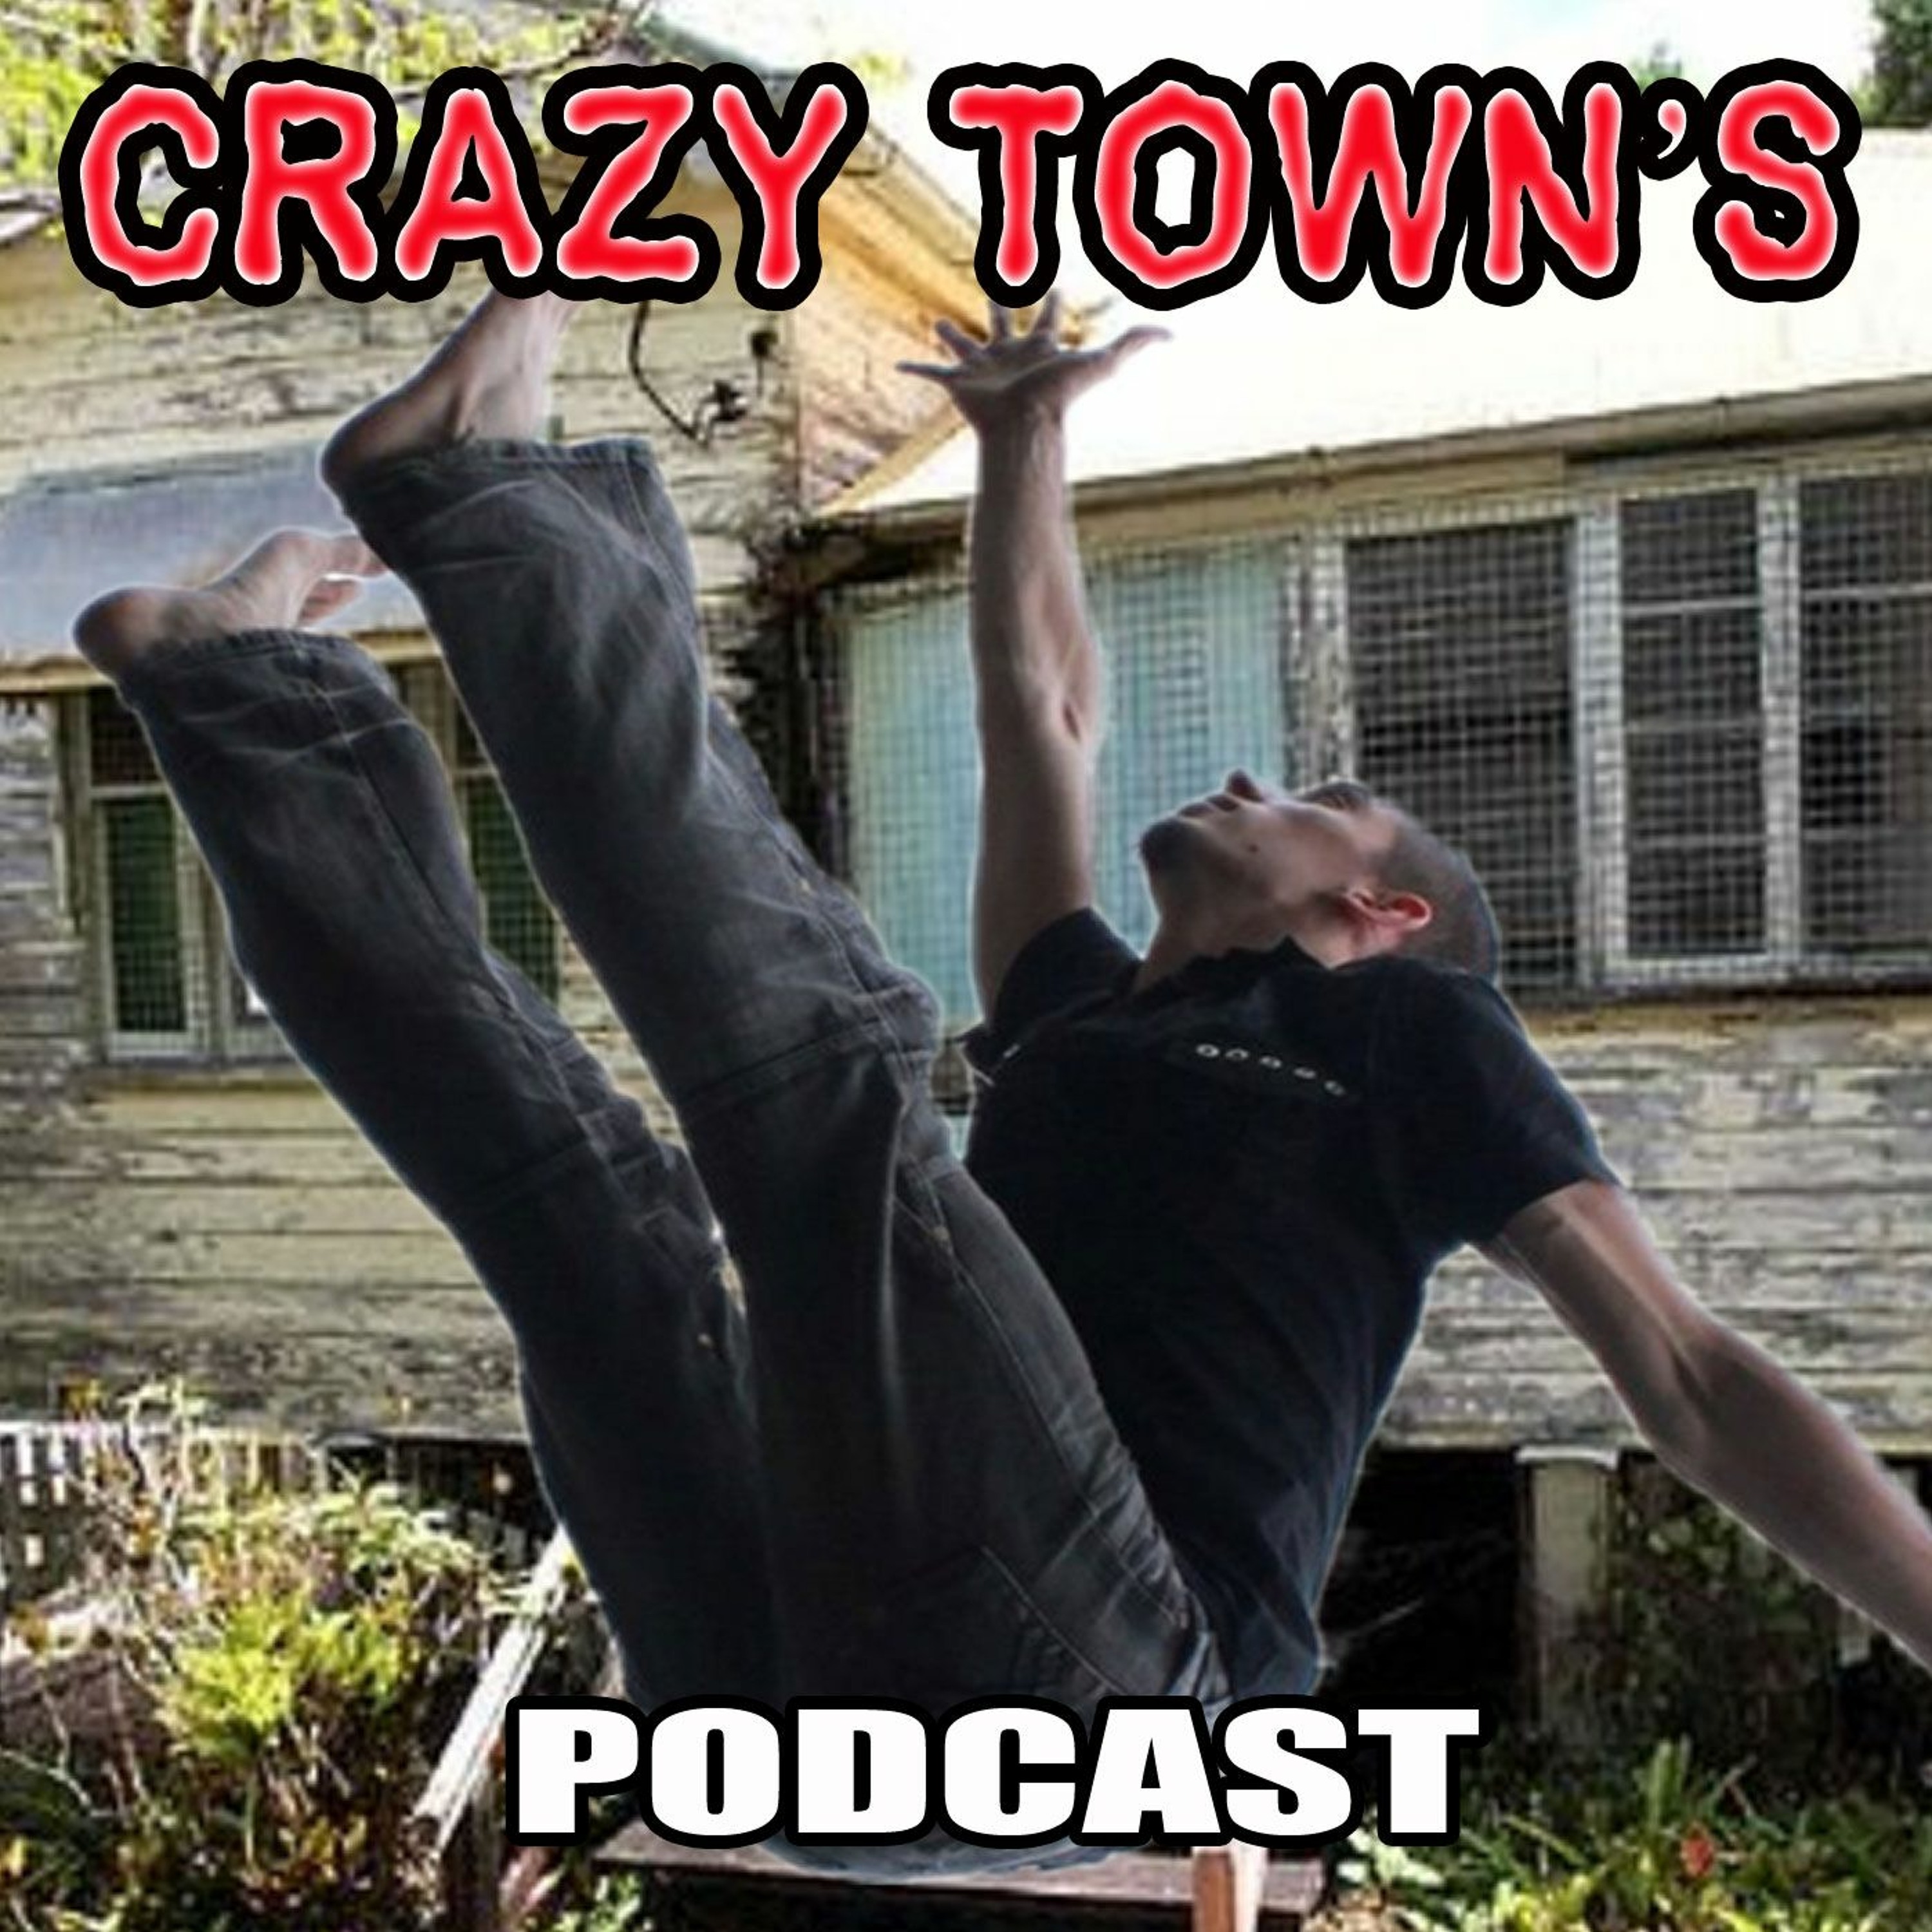 Nobody Cares About Soccer | Ep 745 | Crazy Town Podcast